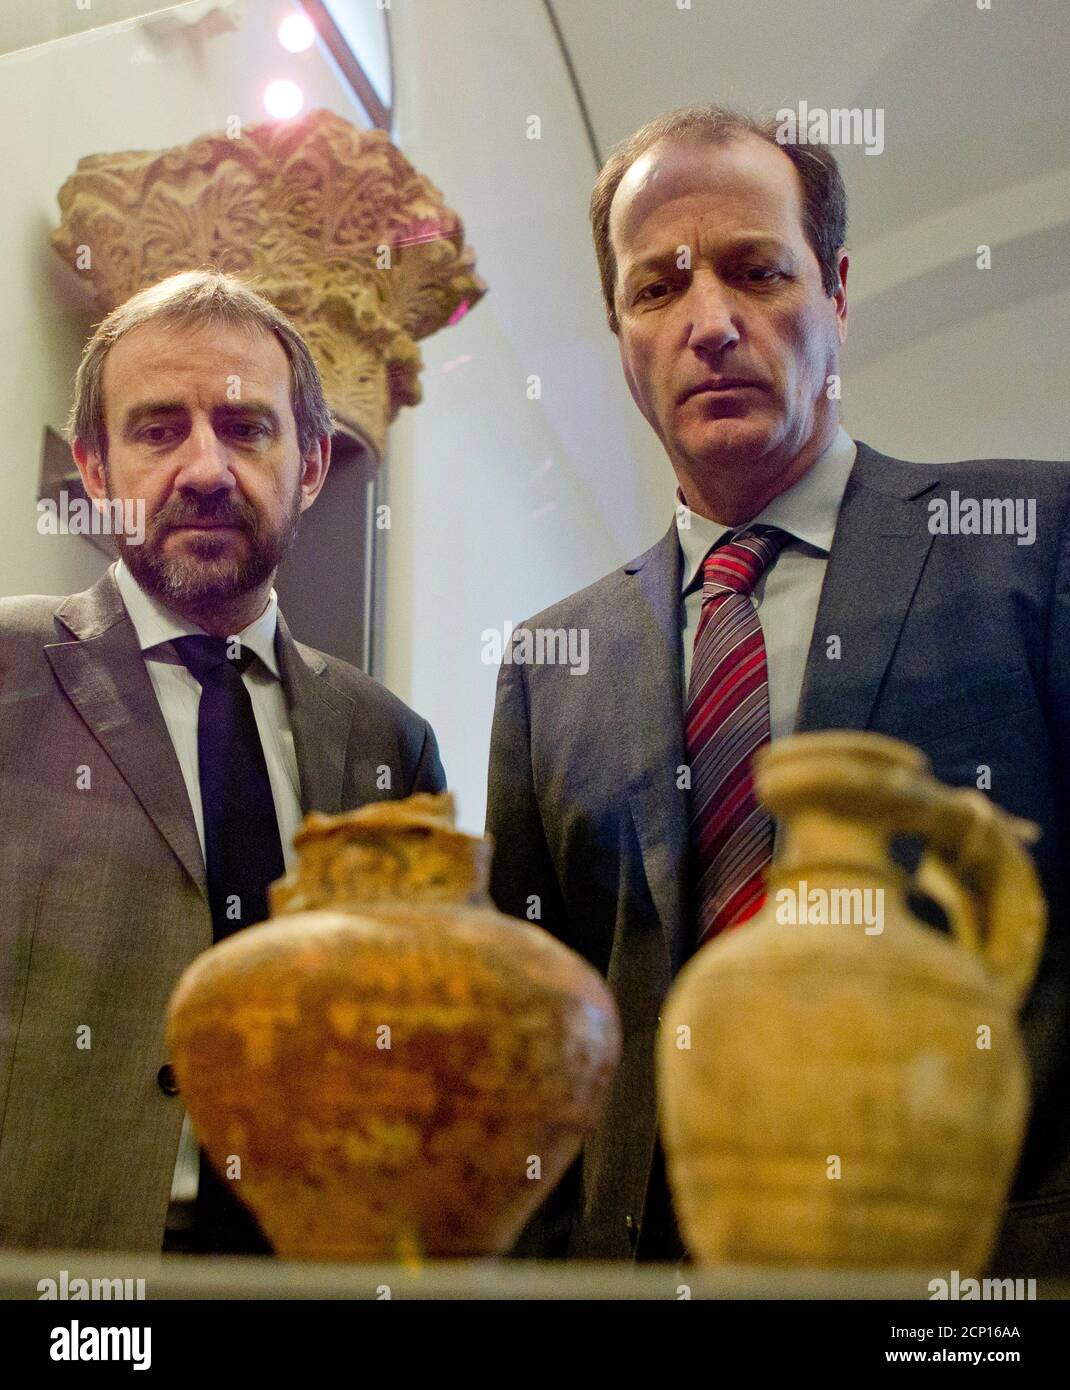 Hermann Parzinger (L) of the Prussian Cultural Heritage Foundation and Dietrich Raue of the Egyptian Museum at Leipzig University look at objects of the late antique-byzantine period during their presentation at the Bode Museum in Berlin, February 6, 2012.  The Bode Museum on Monday displayed 40 late antique-byzantine household objects, belonging to its pre-World War Two inventory, after they were returned from the Egyptian Museum of the University of Leipzig where they had been stored since the Soviet Union restituted the items to former East Germany in 1958.    REUTERS/Thomas Peter (GERMANY  Stock Photo